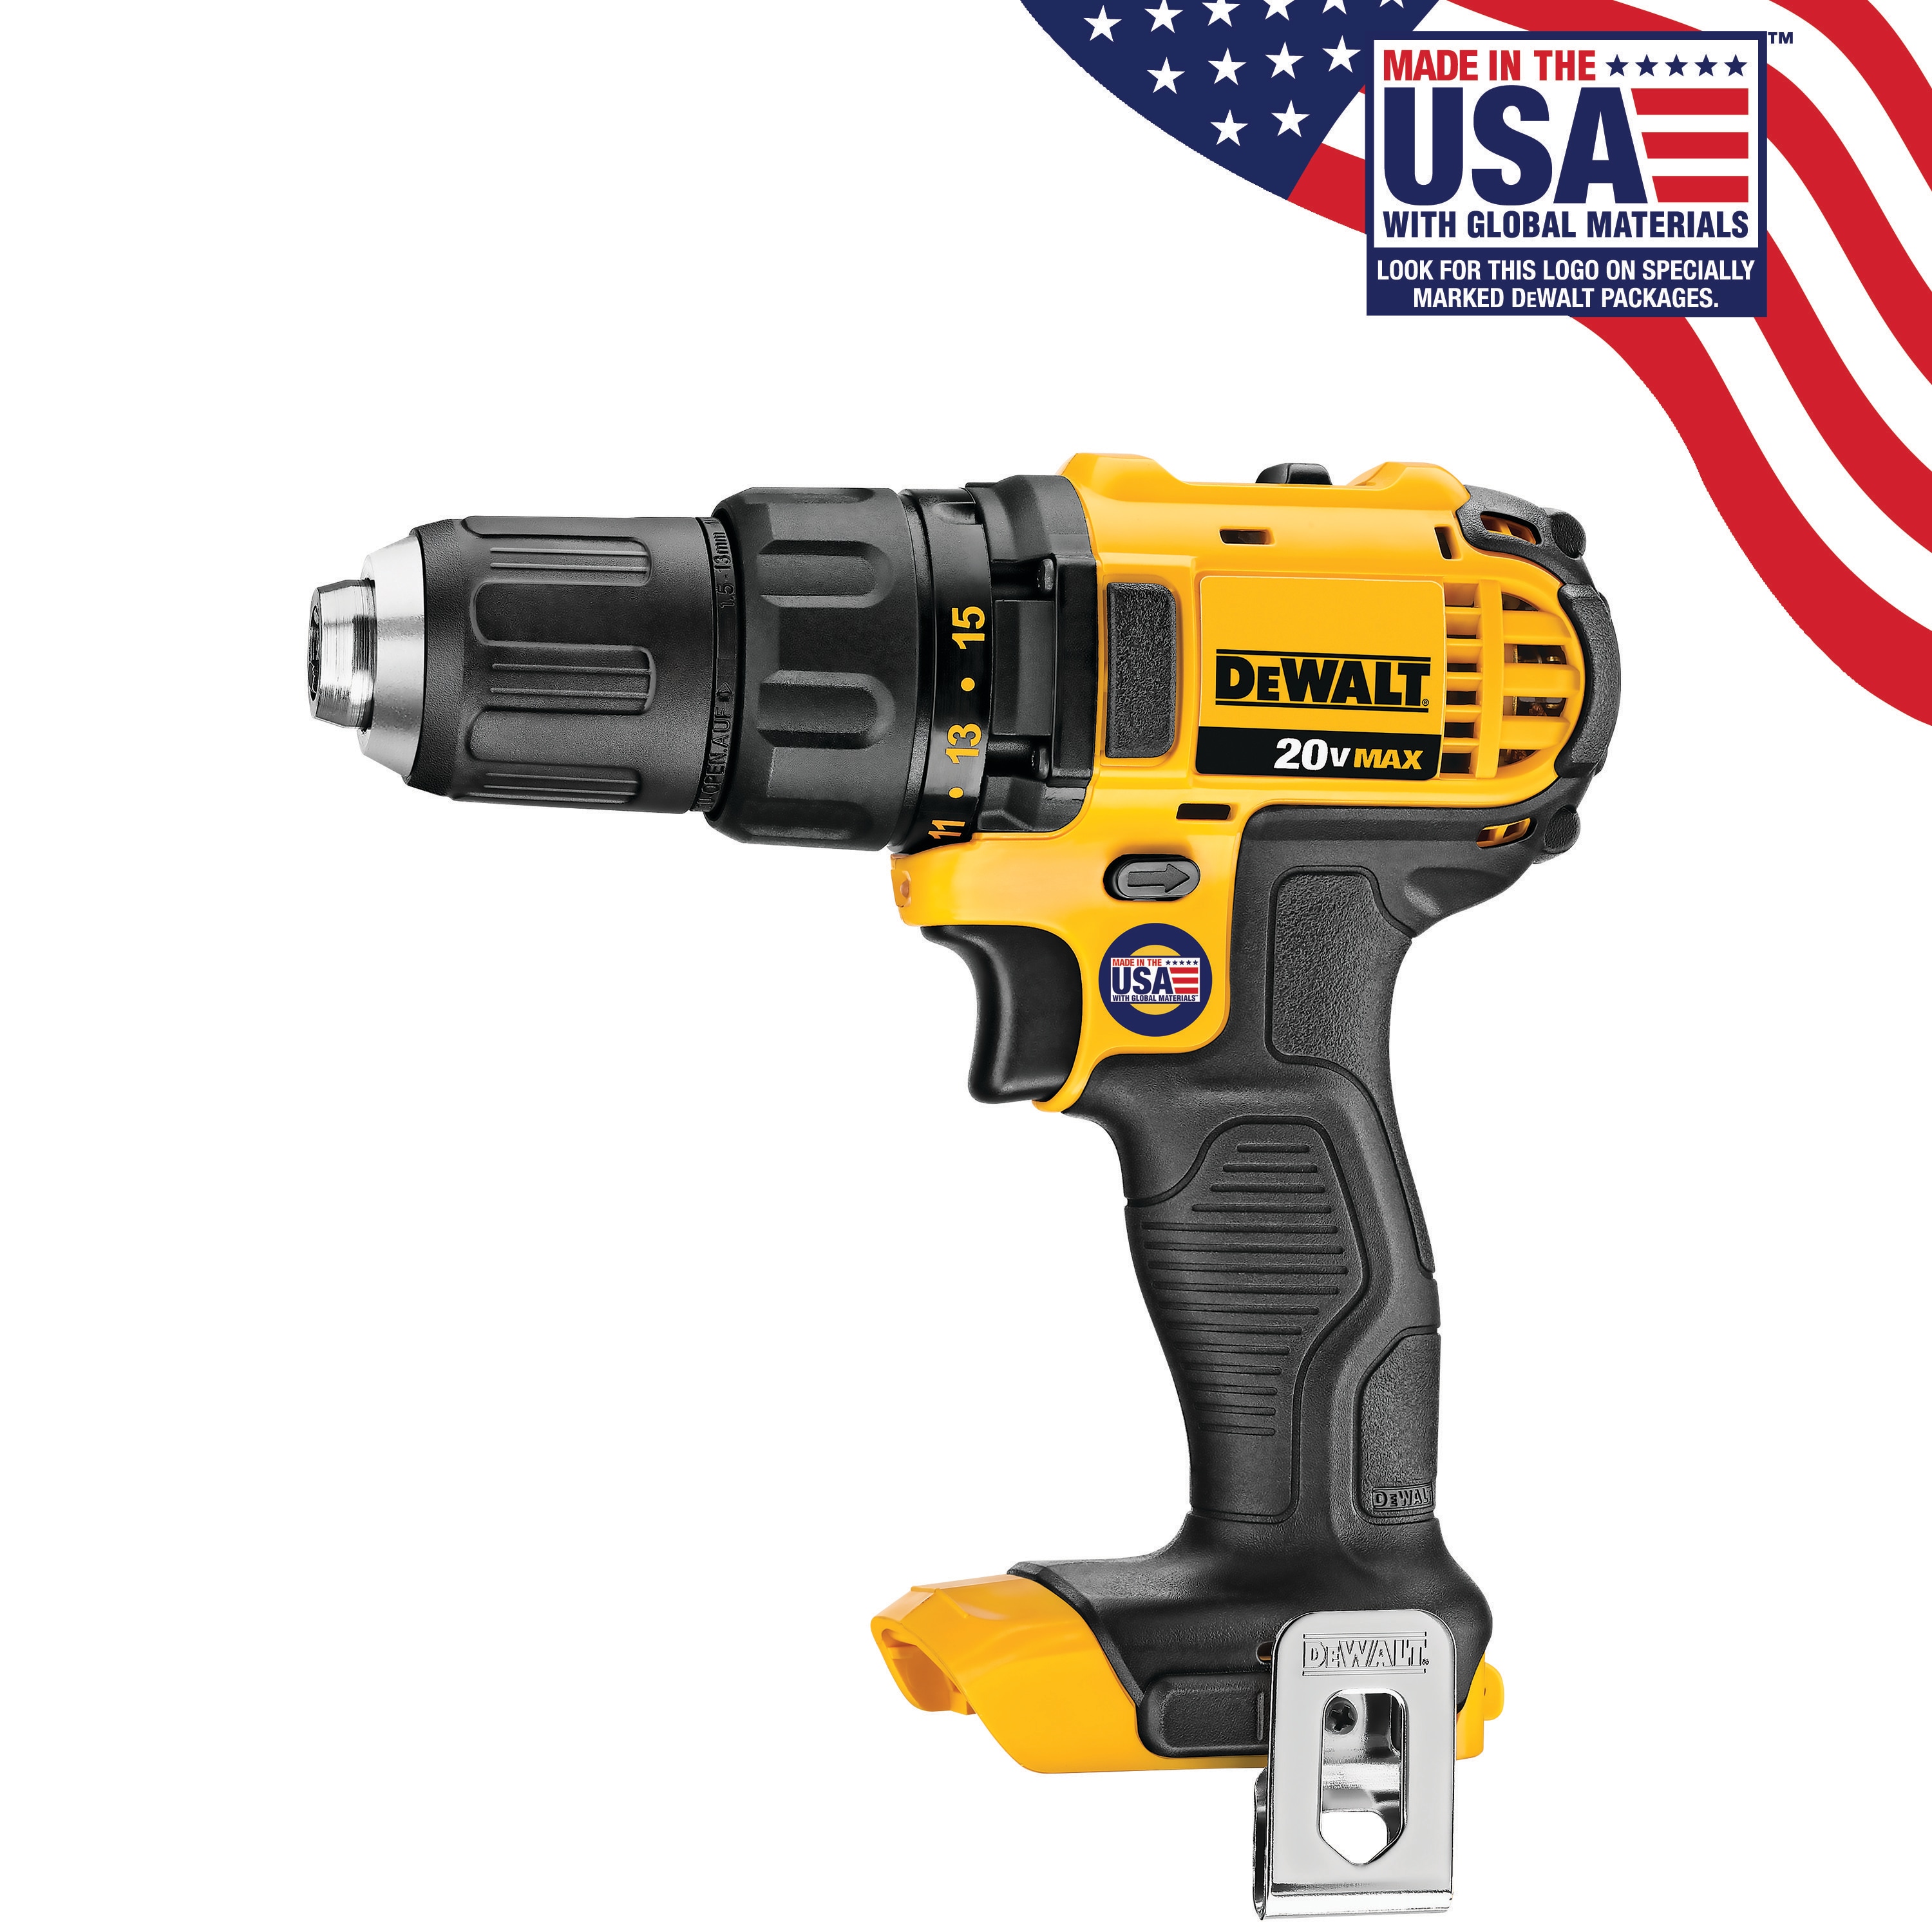 DeWalt Tools - Lowest Prices on Cordless and Corded Power Tools